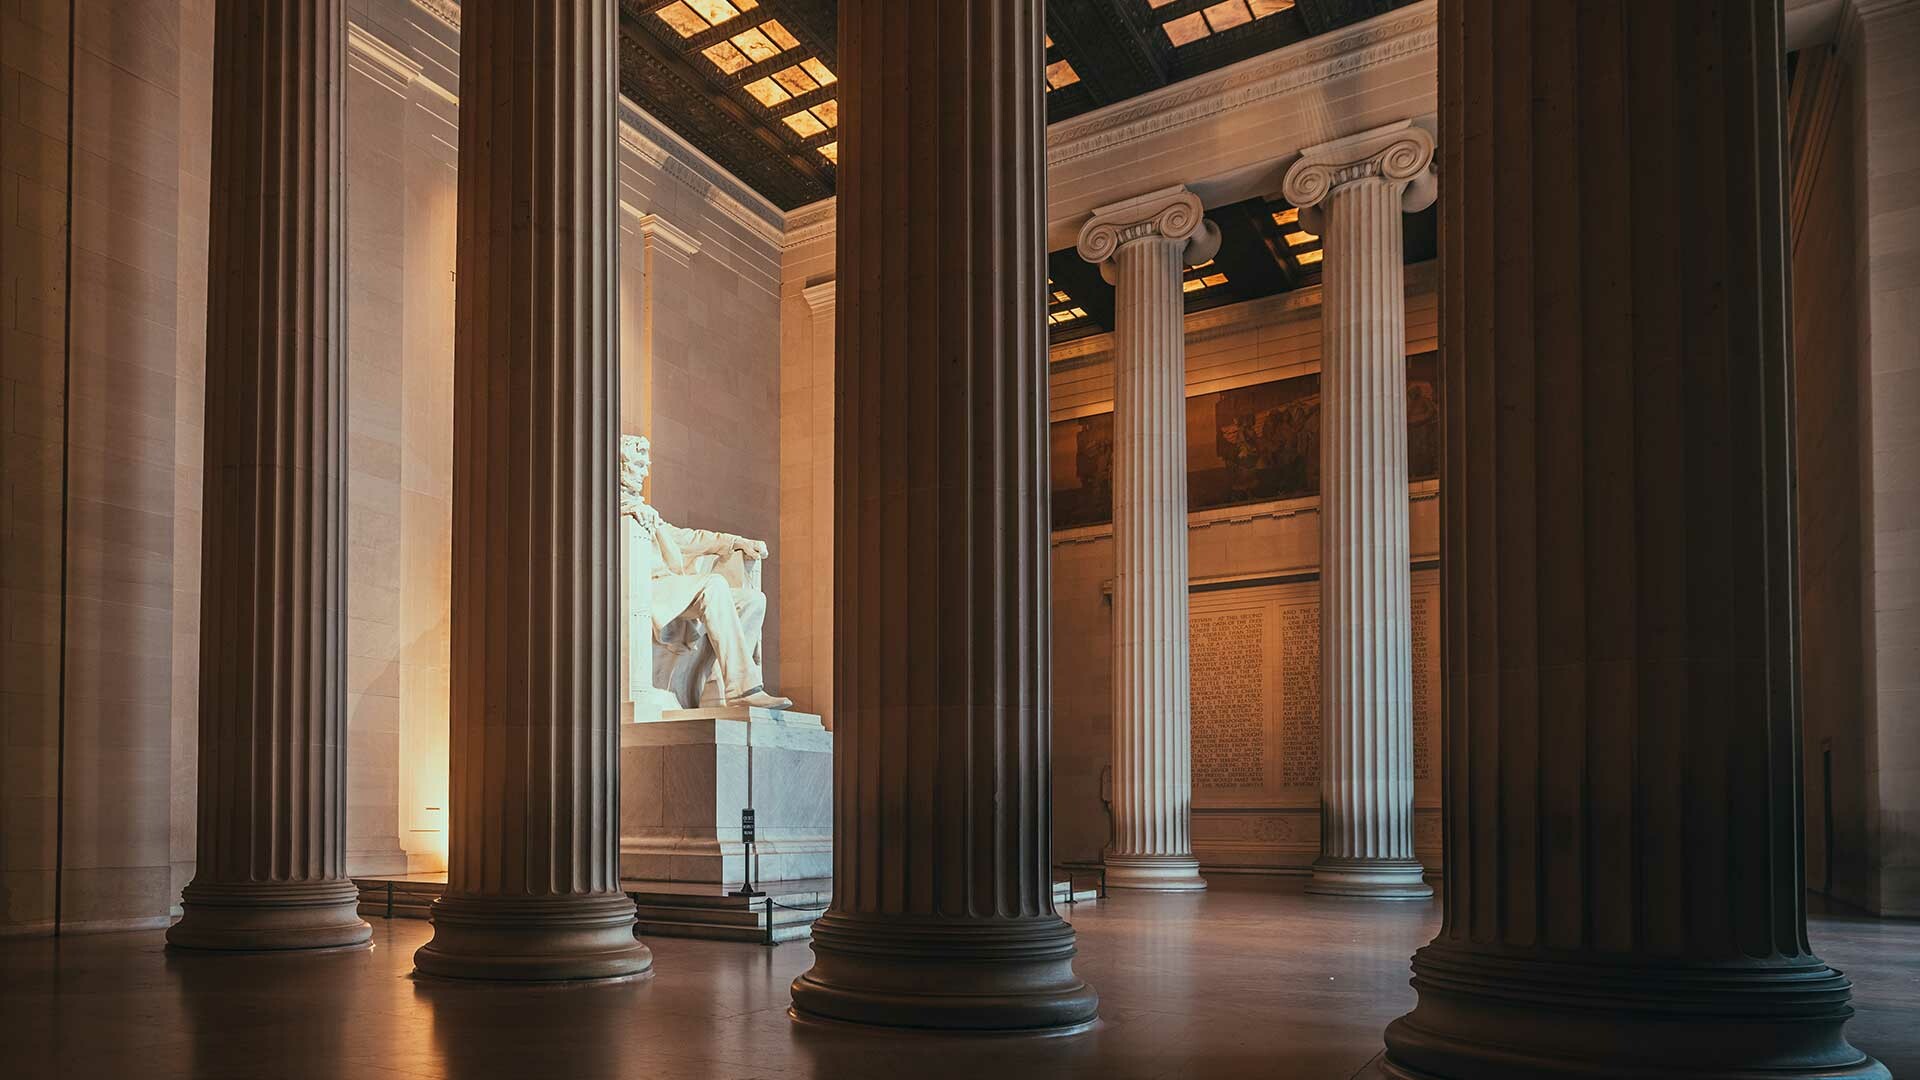 Lincoln Memorial: The iconic monument, Built to honor the 16th U.S. president. 1920x1080 Full HD Background.